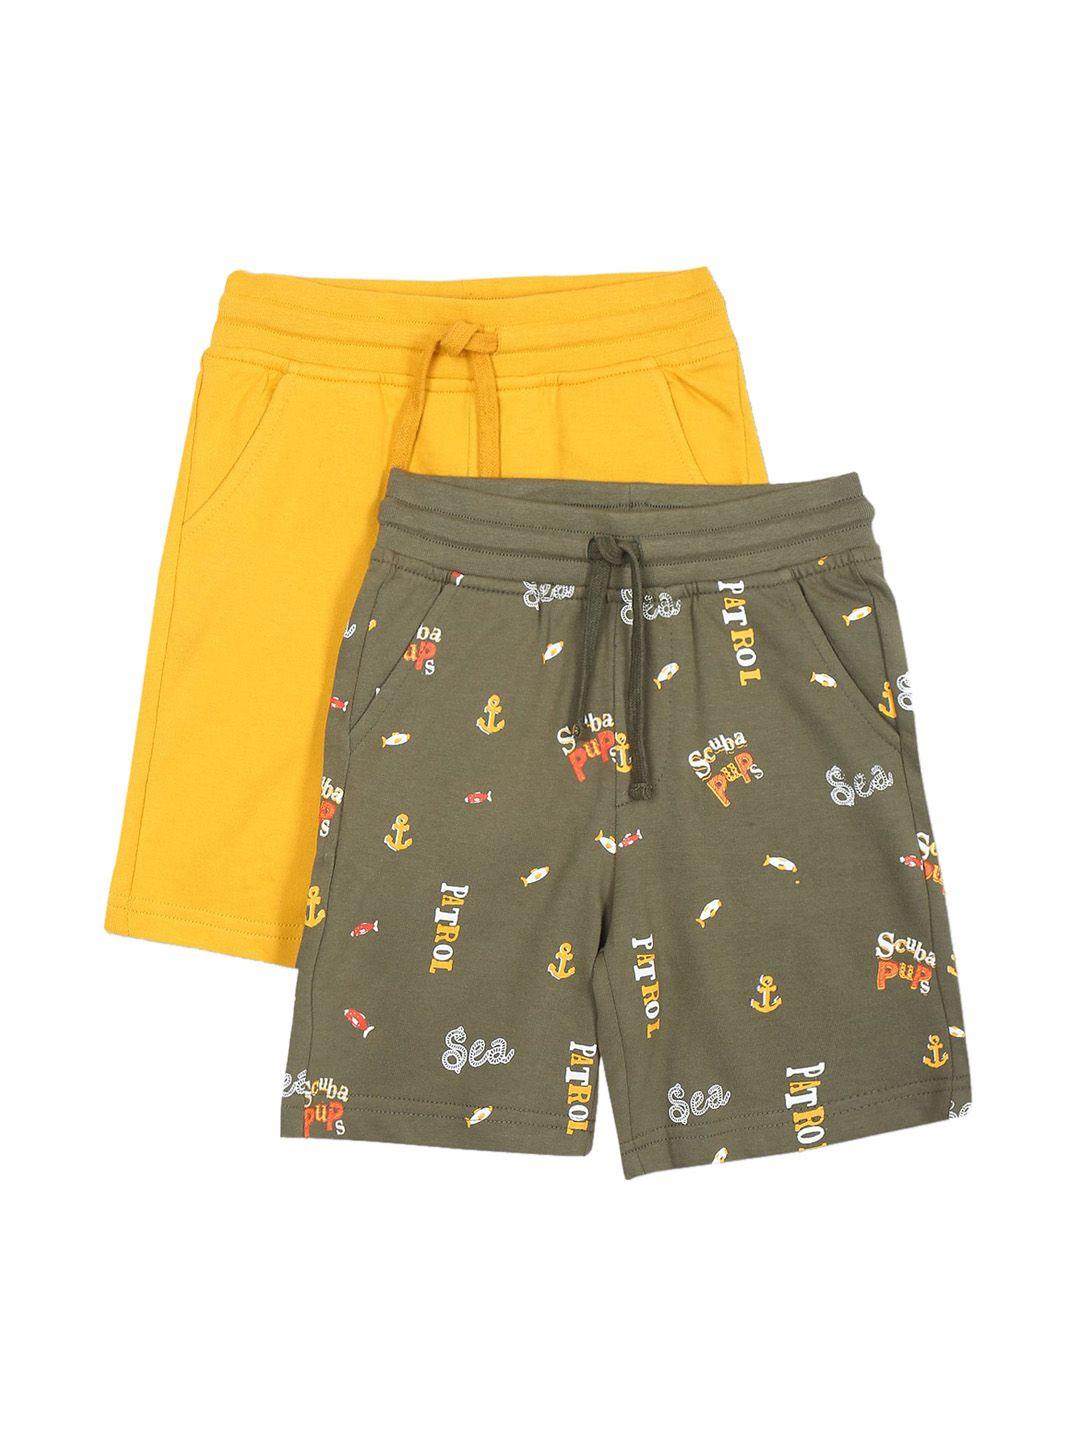 Colt Boys Pack of 2 Assorted Printed Cotton Shorts